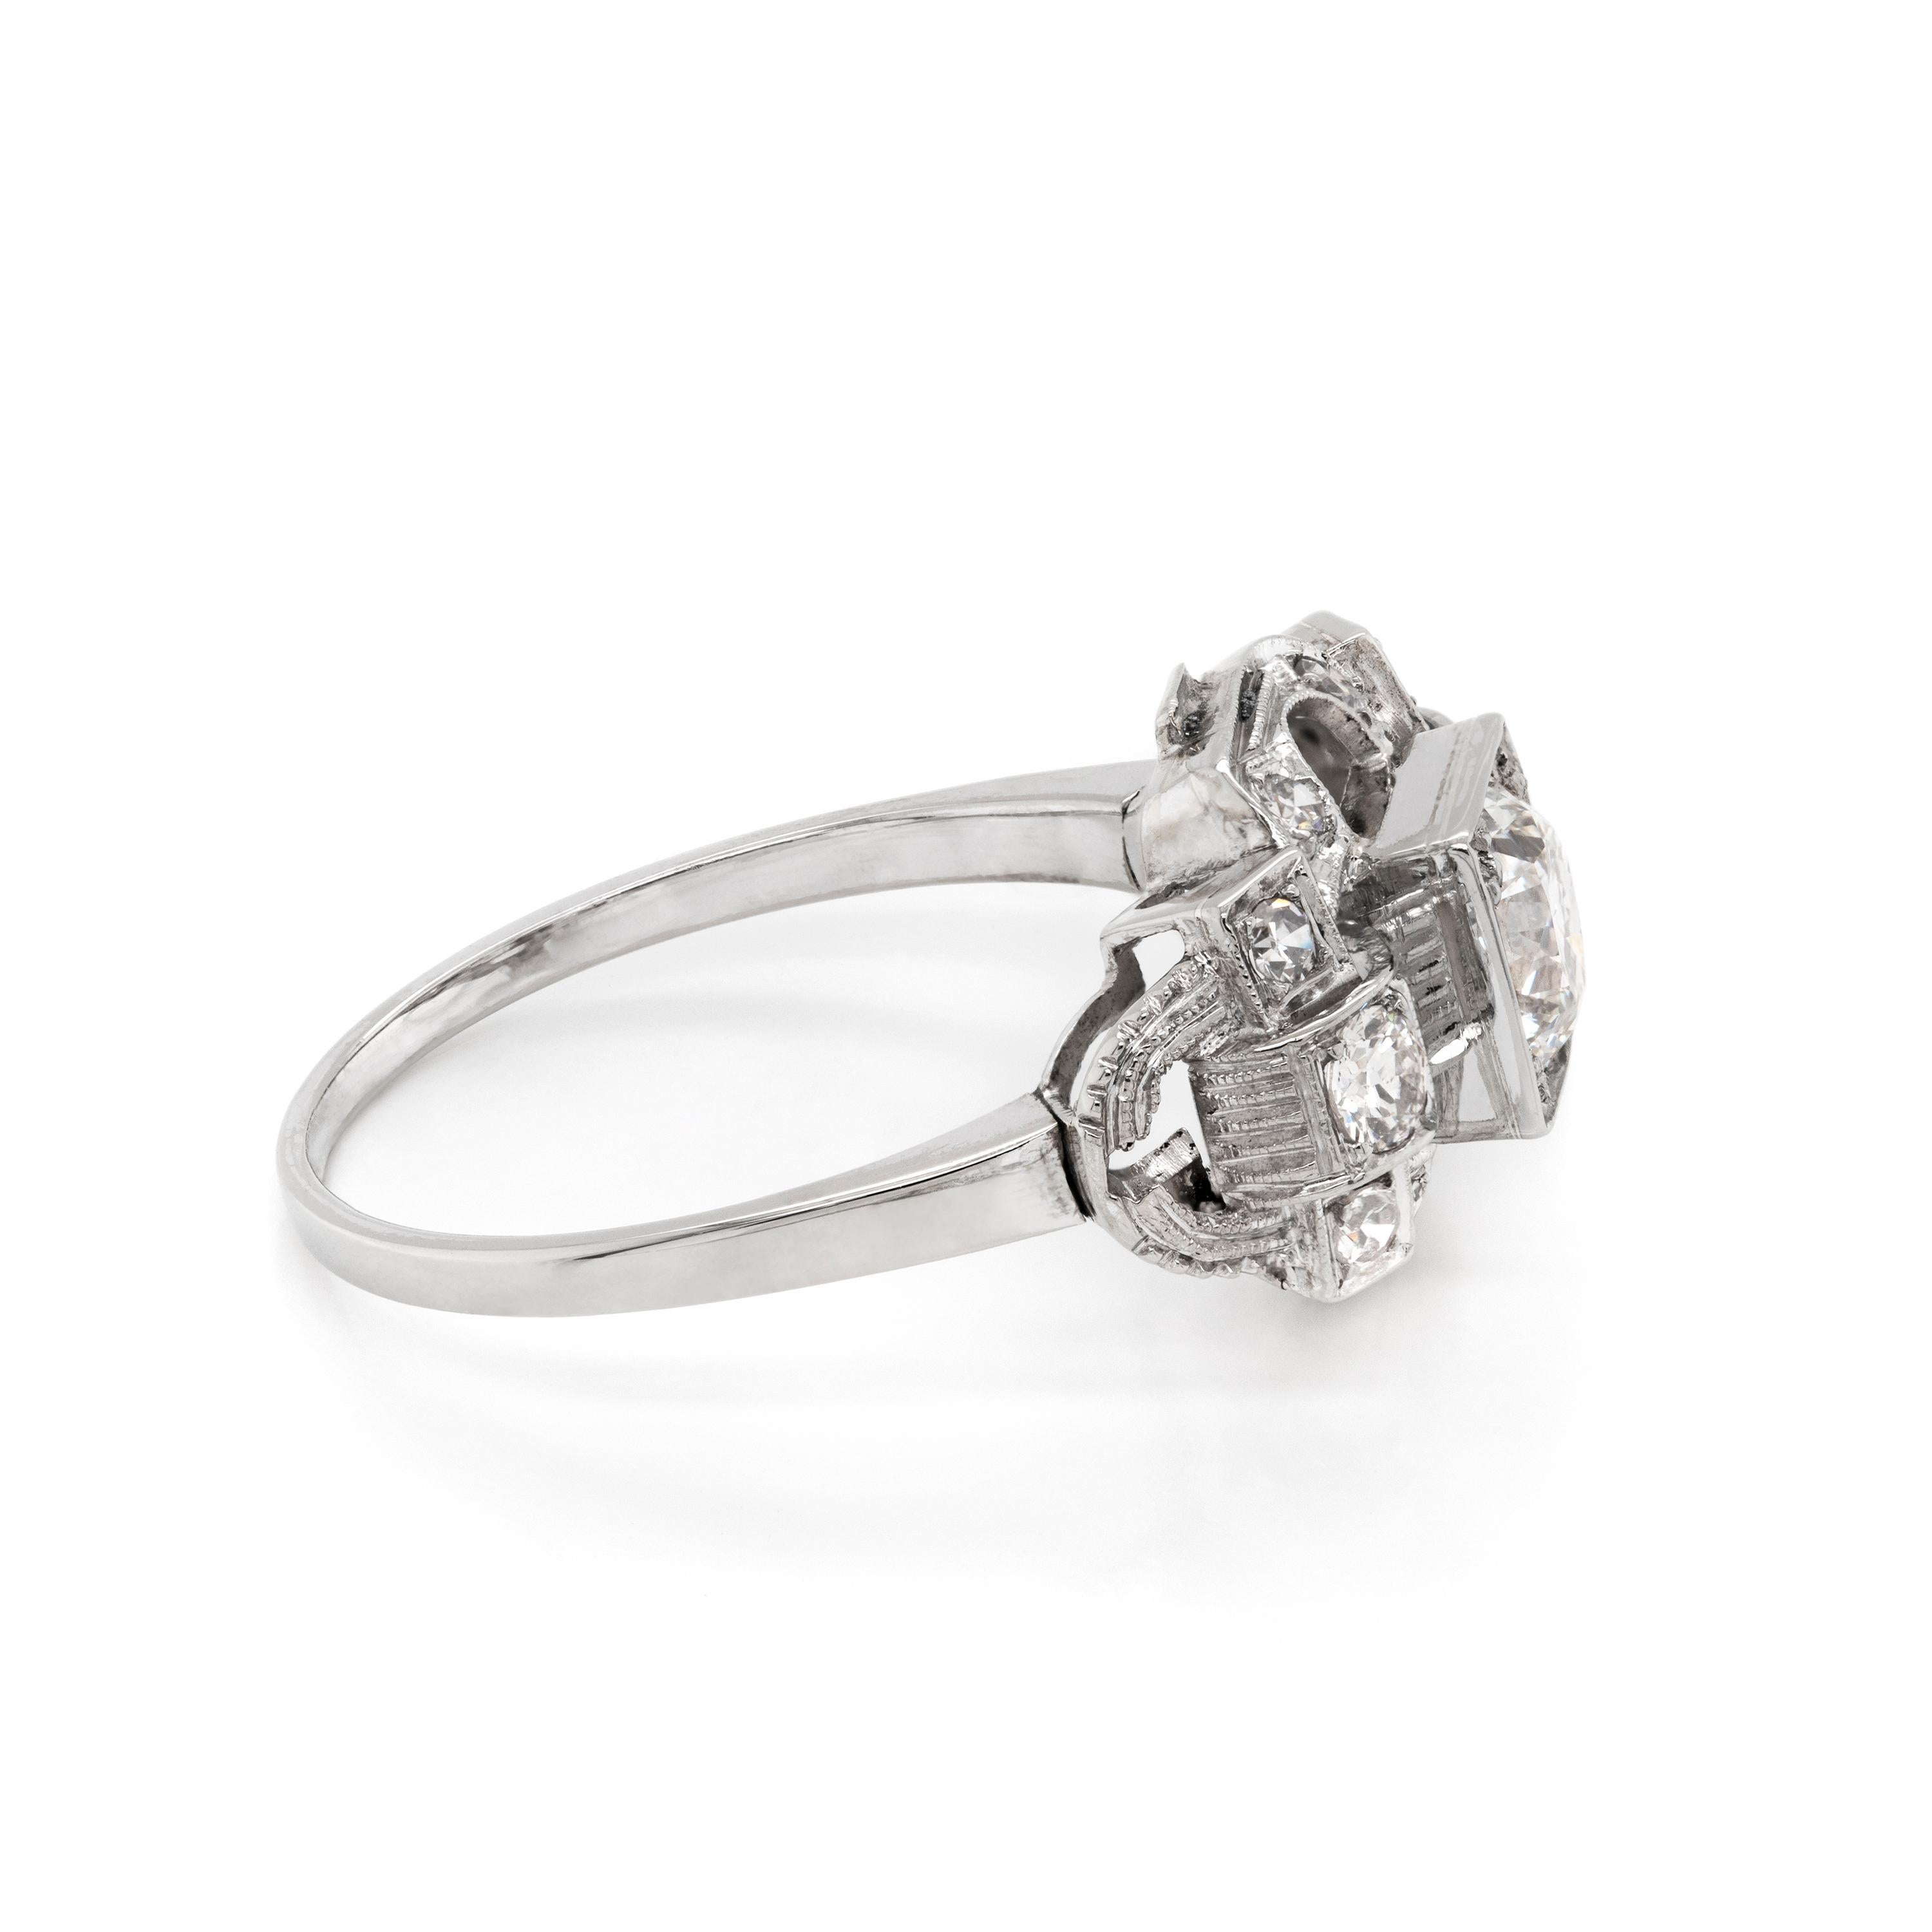 Beautiful handmade Art Deco engagement ring set with an old European cut diamond weighing 0.80 carats in the centre, complimented by 5 eight cut diamonds on either side within a very intricate open work mount. The rings design is undeniably Deco,